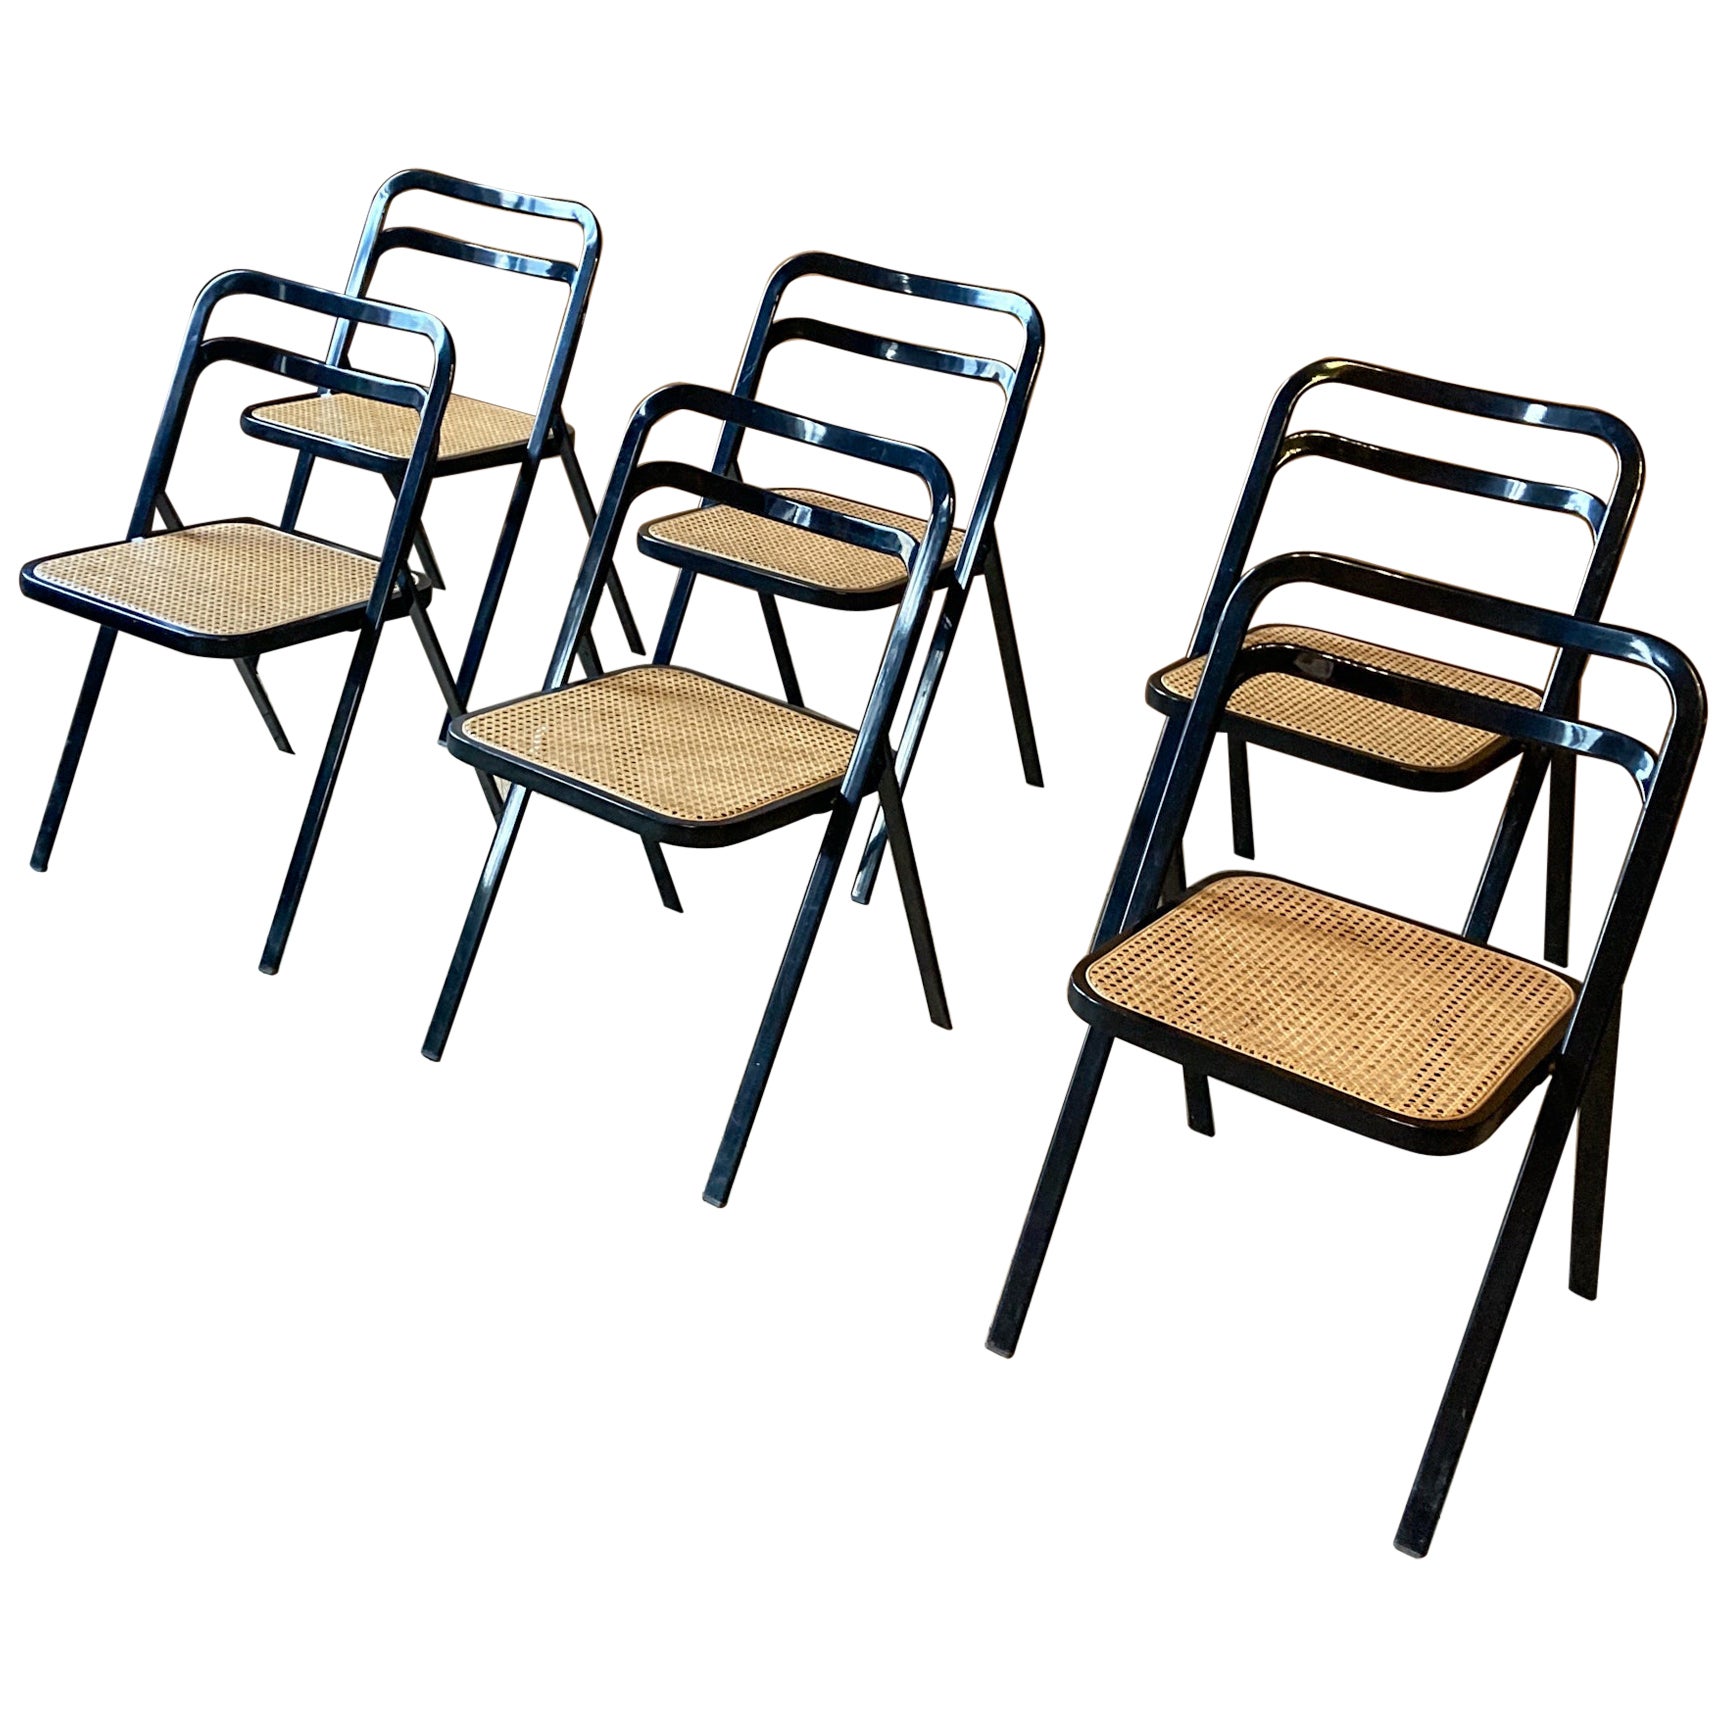 Mid-Century Modern Folding Chairs Viennese Straw by G. Cattelan, Italy 1970s